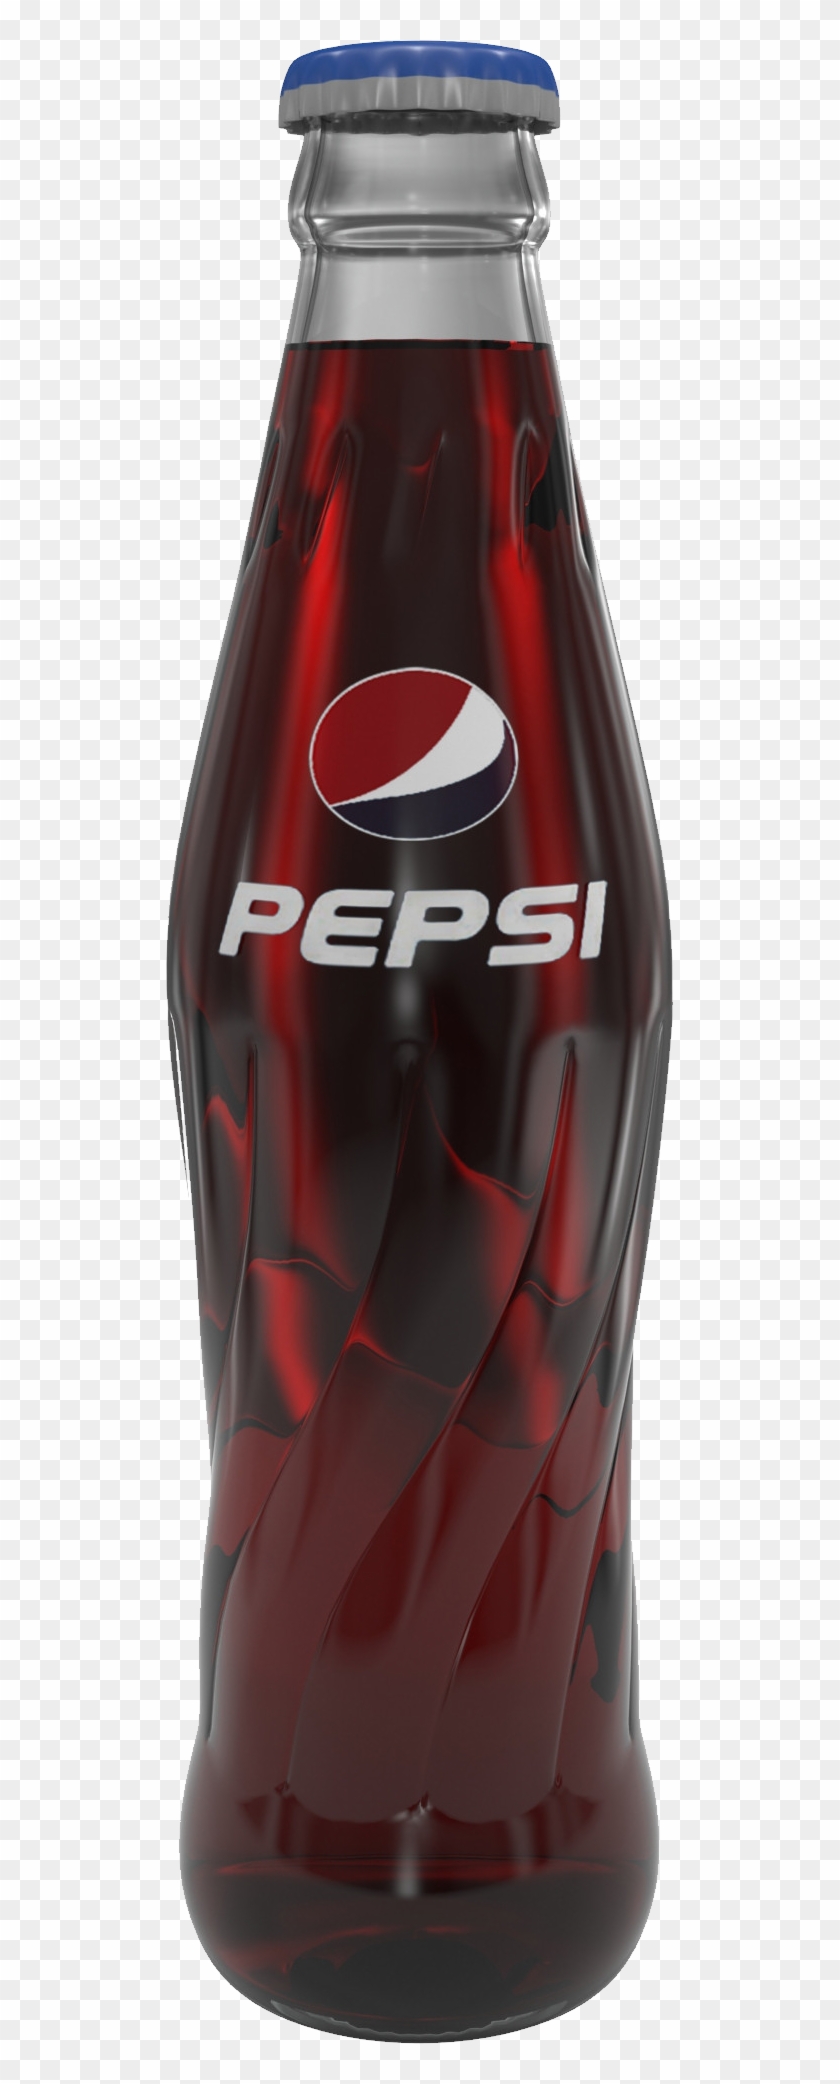 Pepsi Bottle Png Image - Pepsi .png Clipart #466030